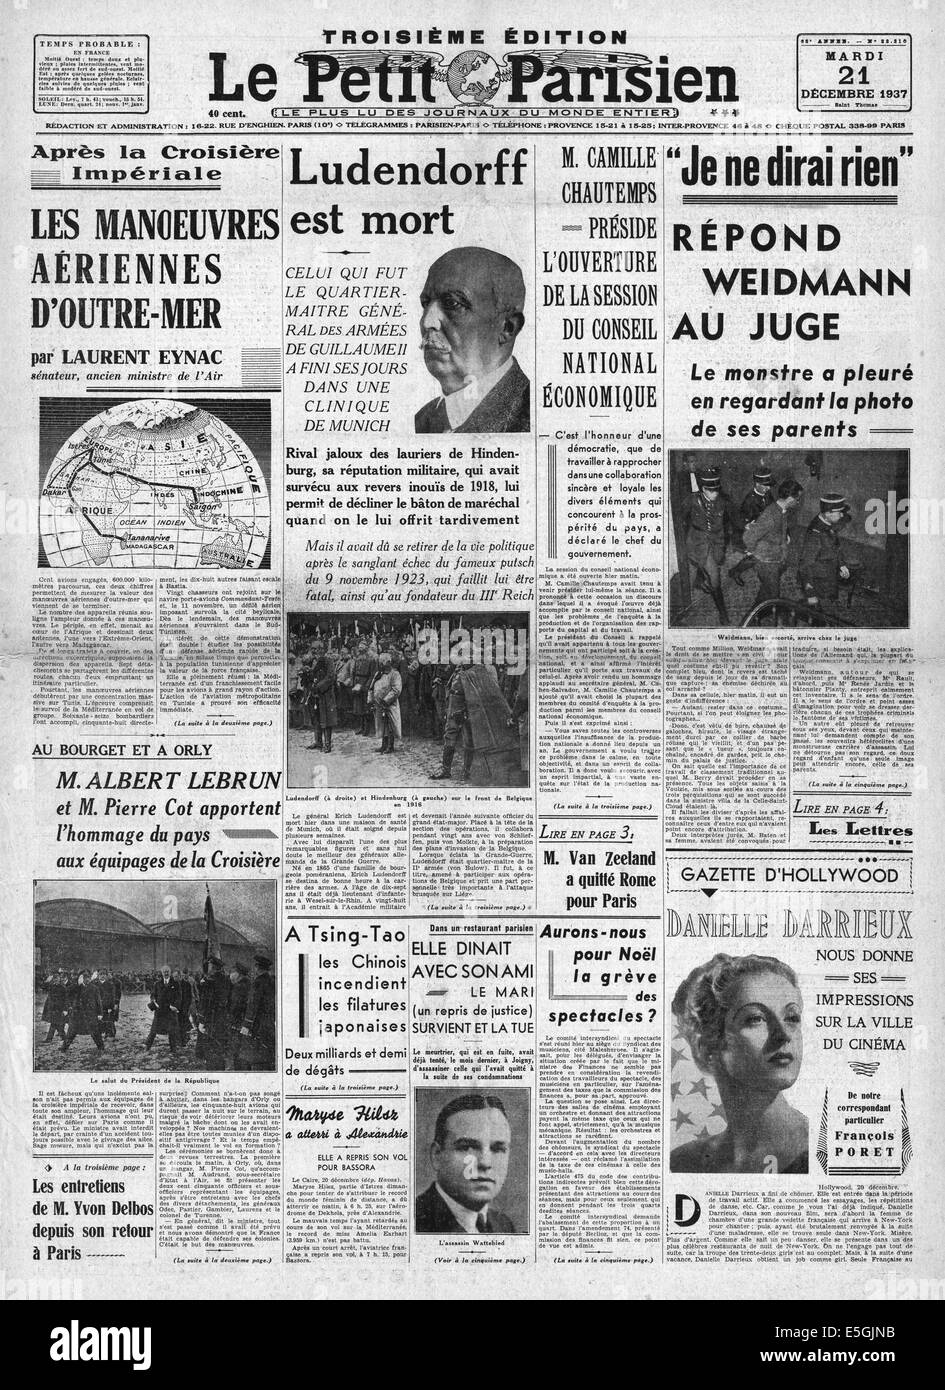 1937 Le Petit Parisien (France)  front page reporting the death of Erich Ludendorff Stock Photo